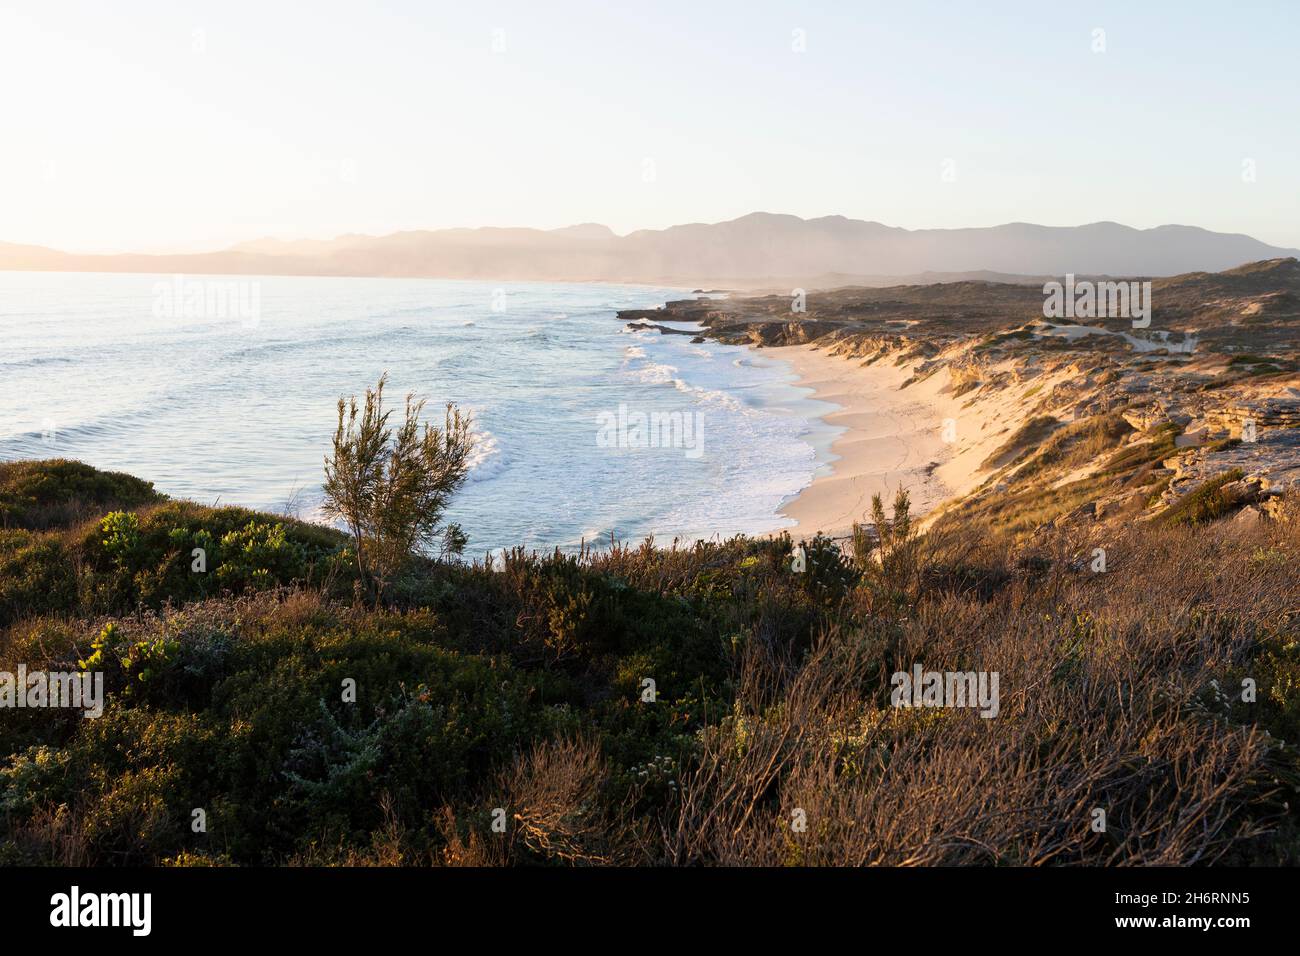 View from the cliffs over the sandy beach and waves breaking on shore. Stock Photo